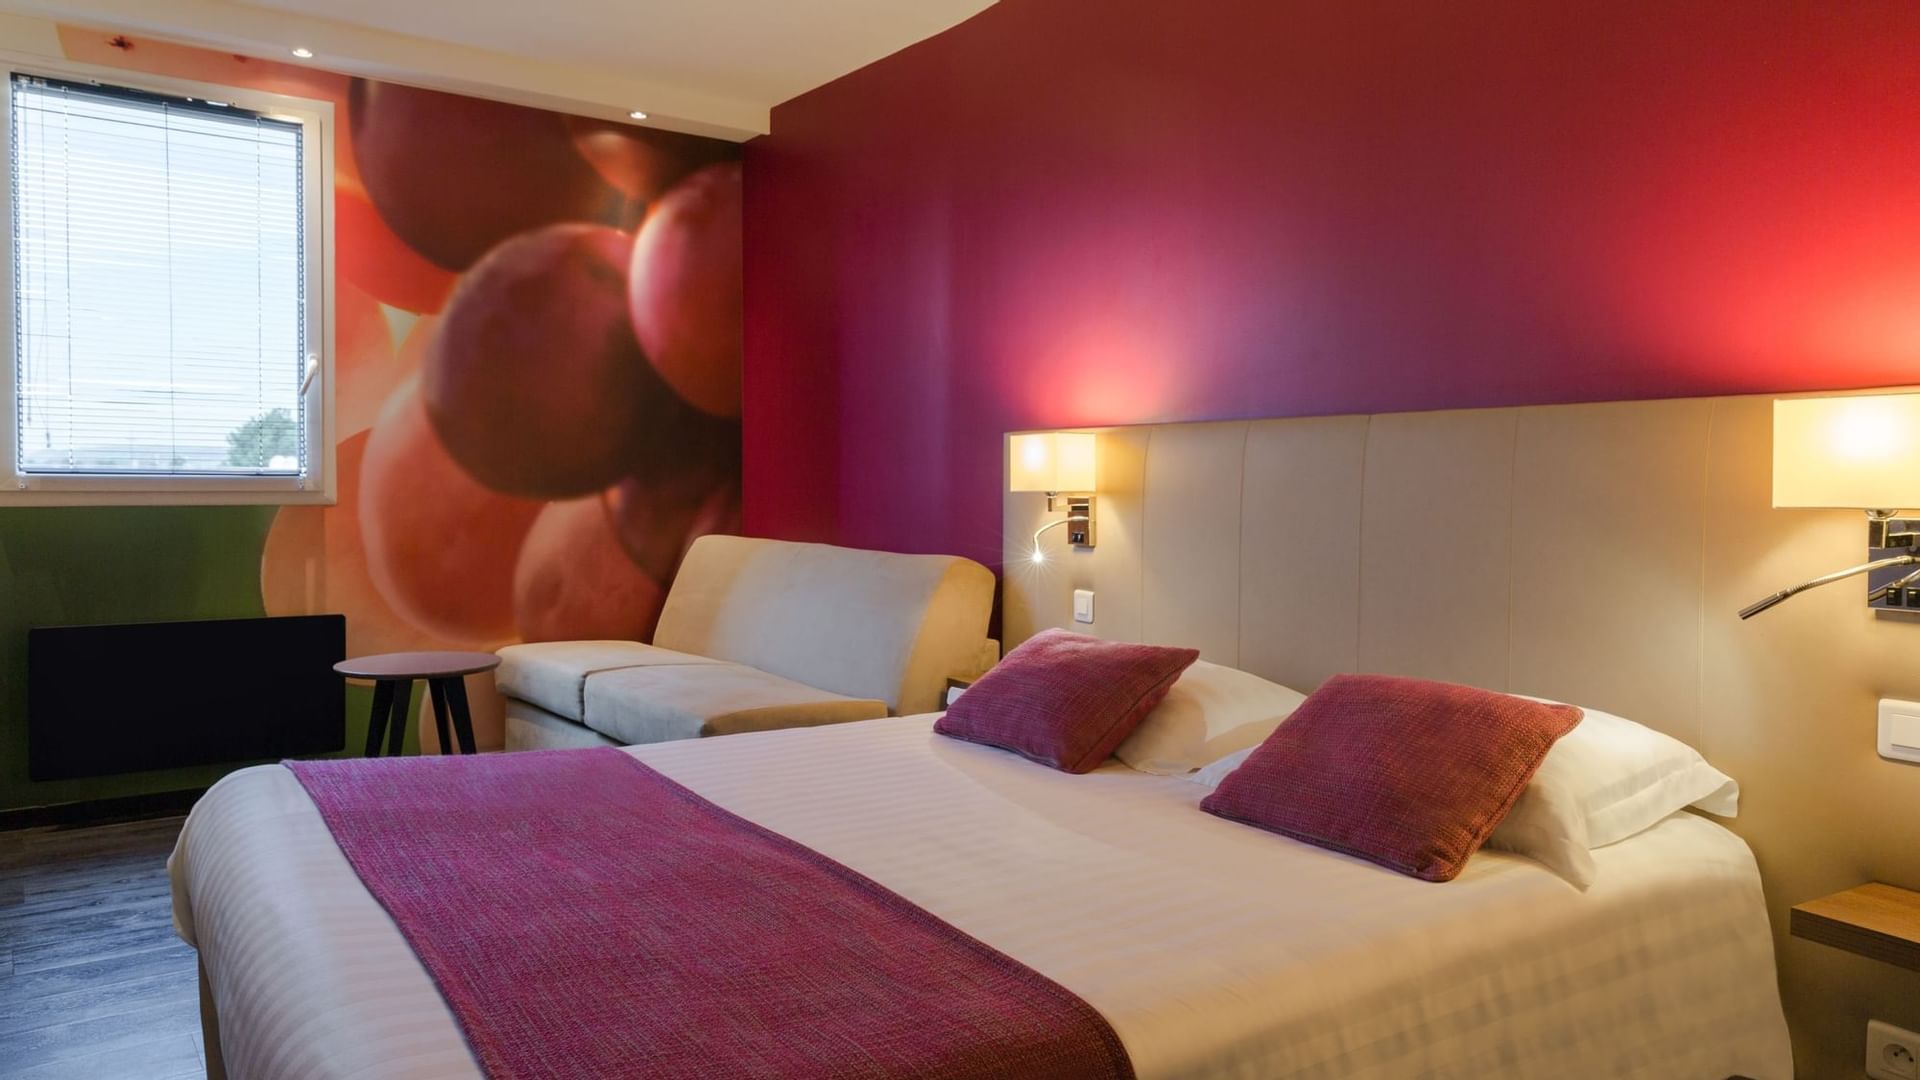 Double bed with red & white bedding at Originals Hotels